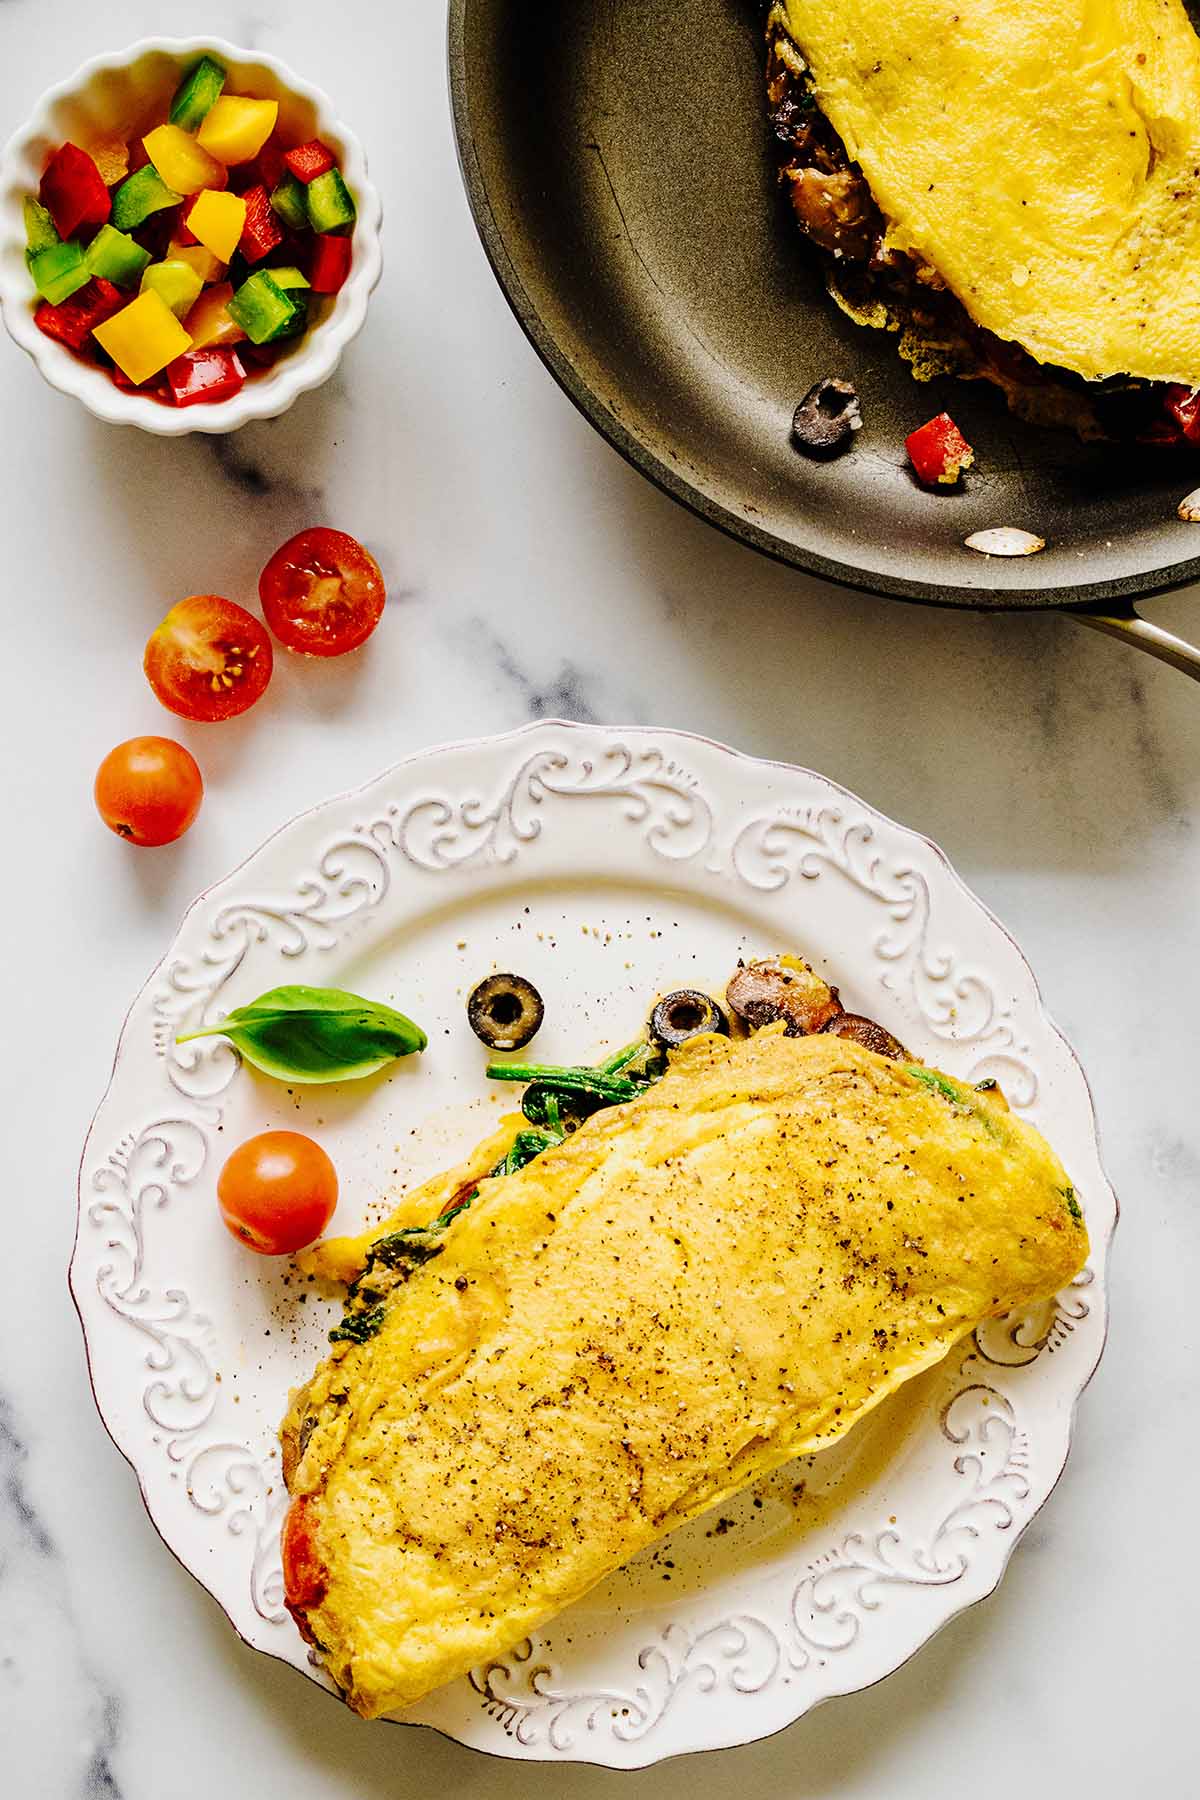 Overhead view of a vegetable omelette on a white plate with tomatoes and a small bowl of chopped peppers